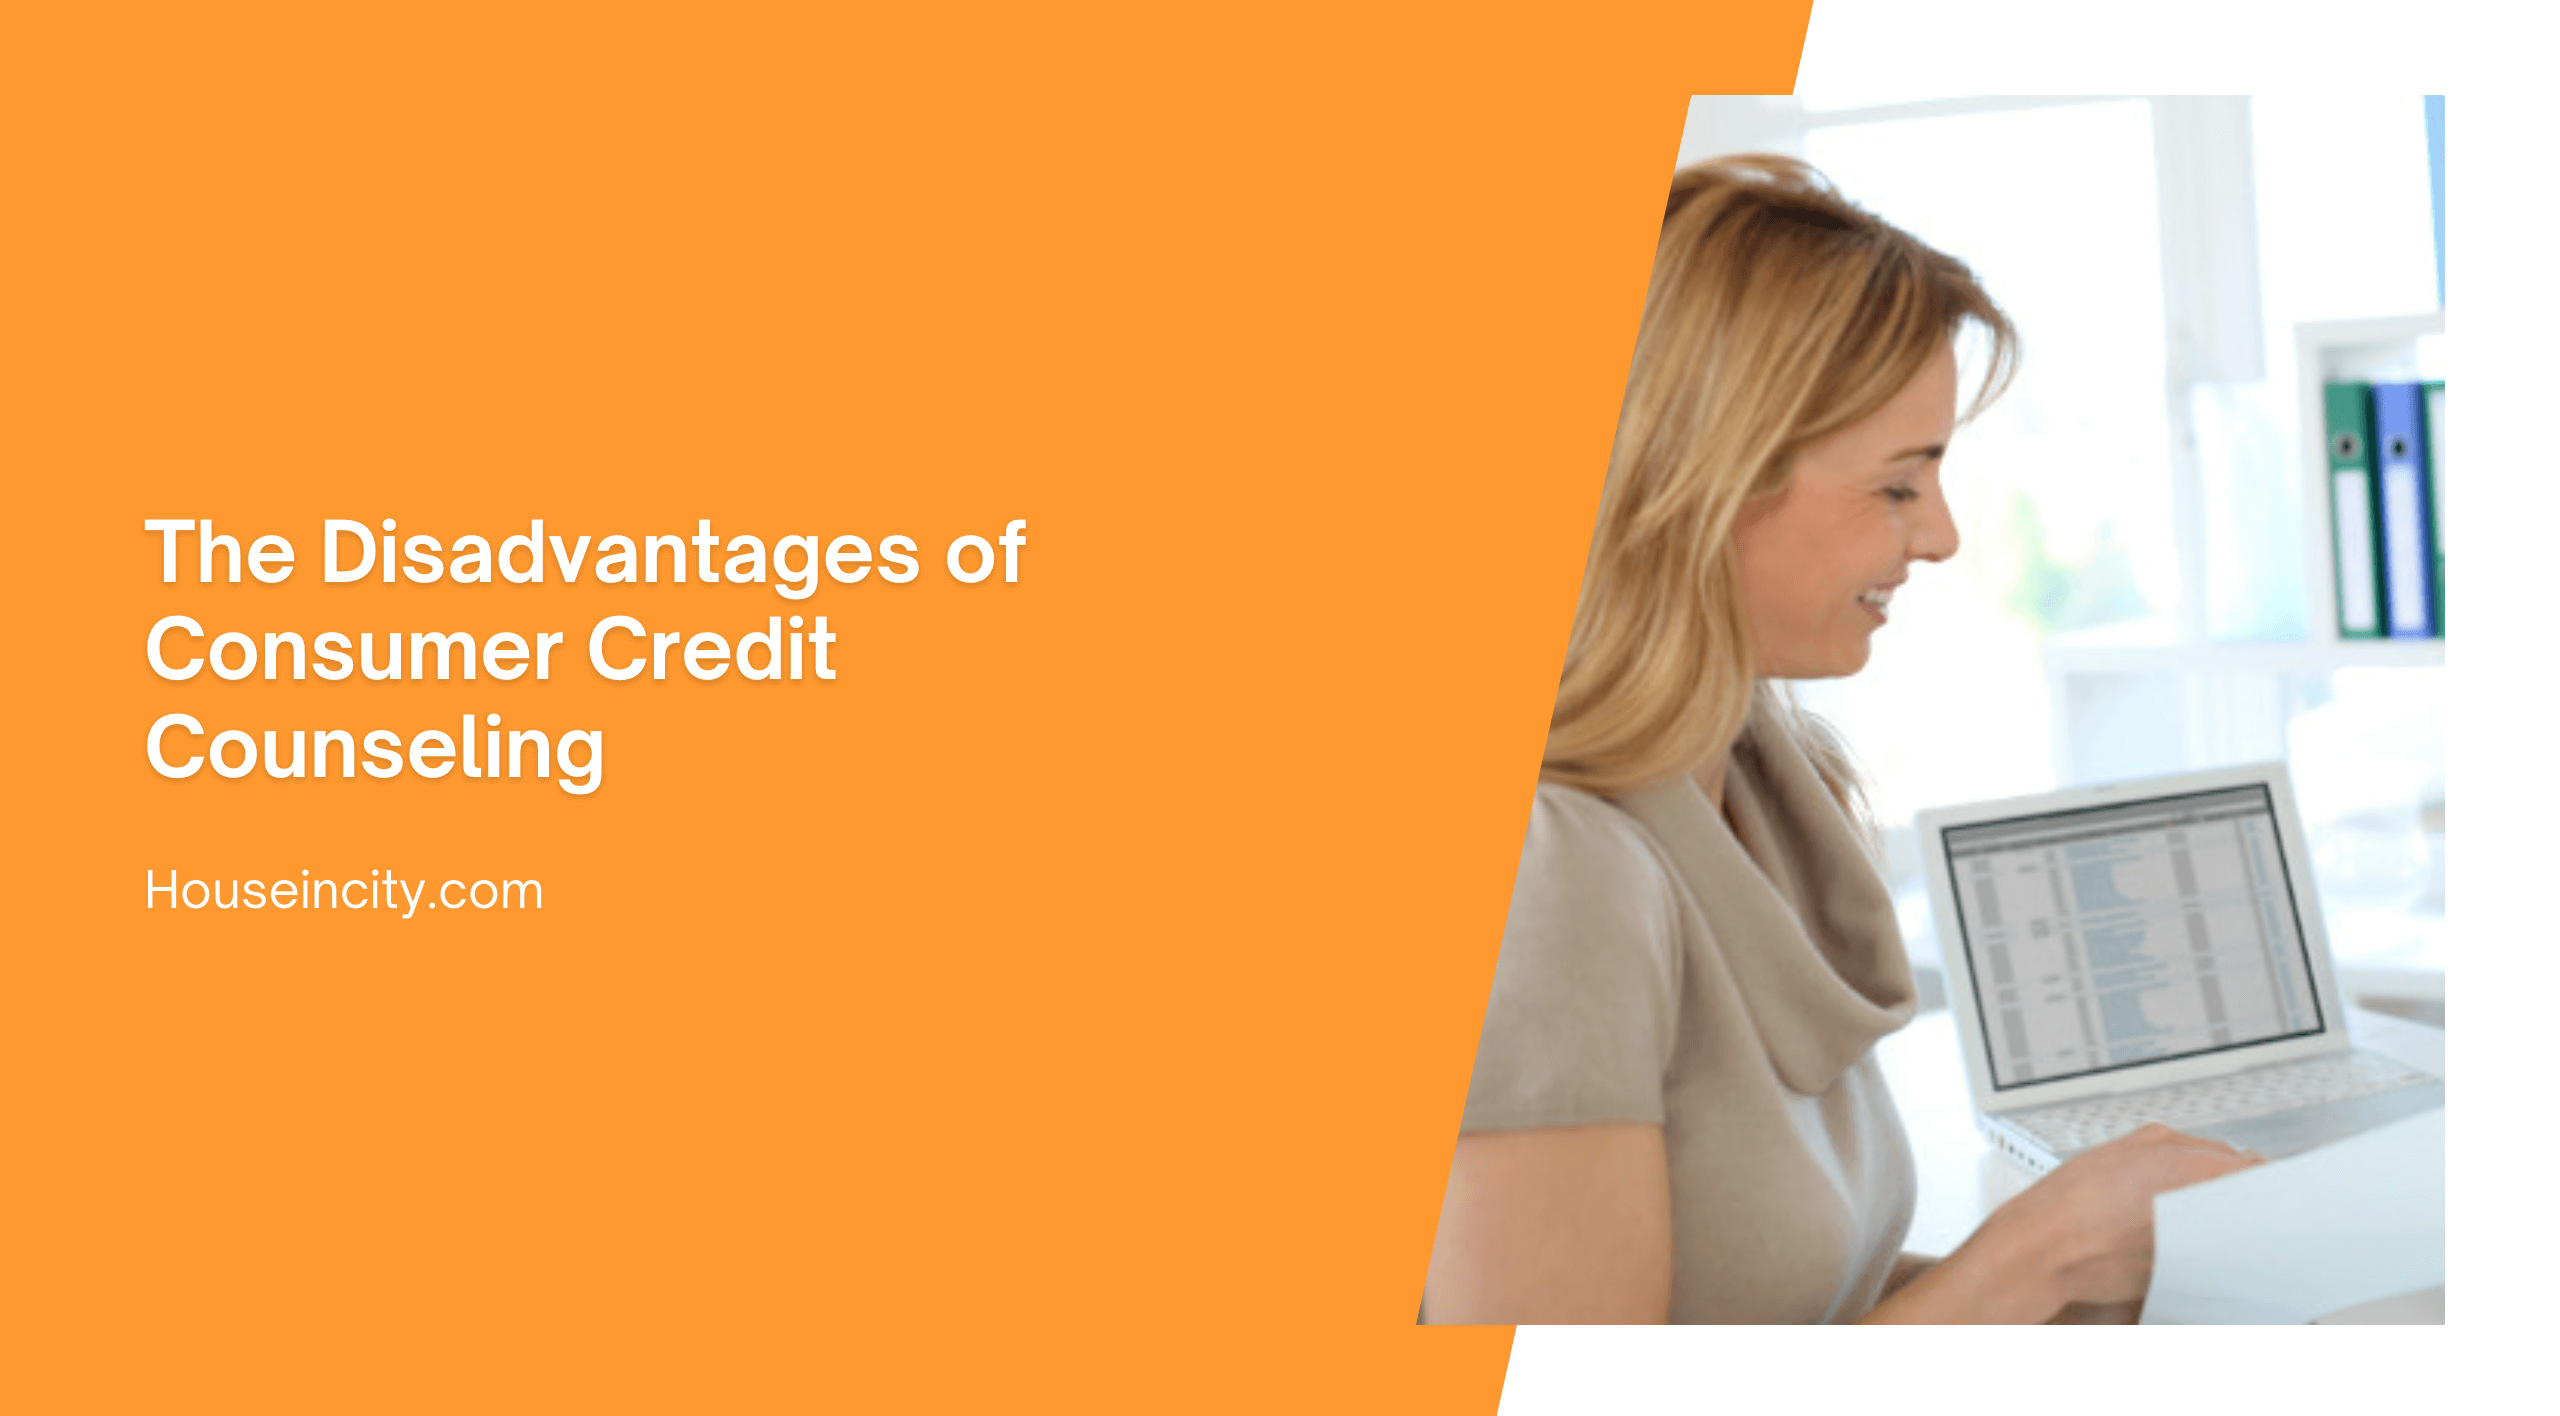 The Disadvantages of Consumer Credit Counseling